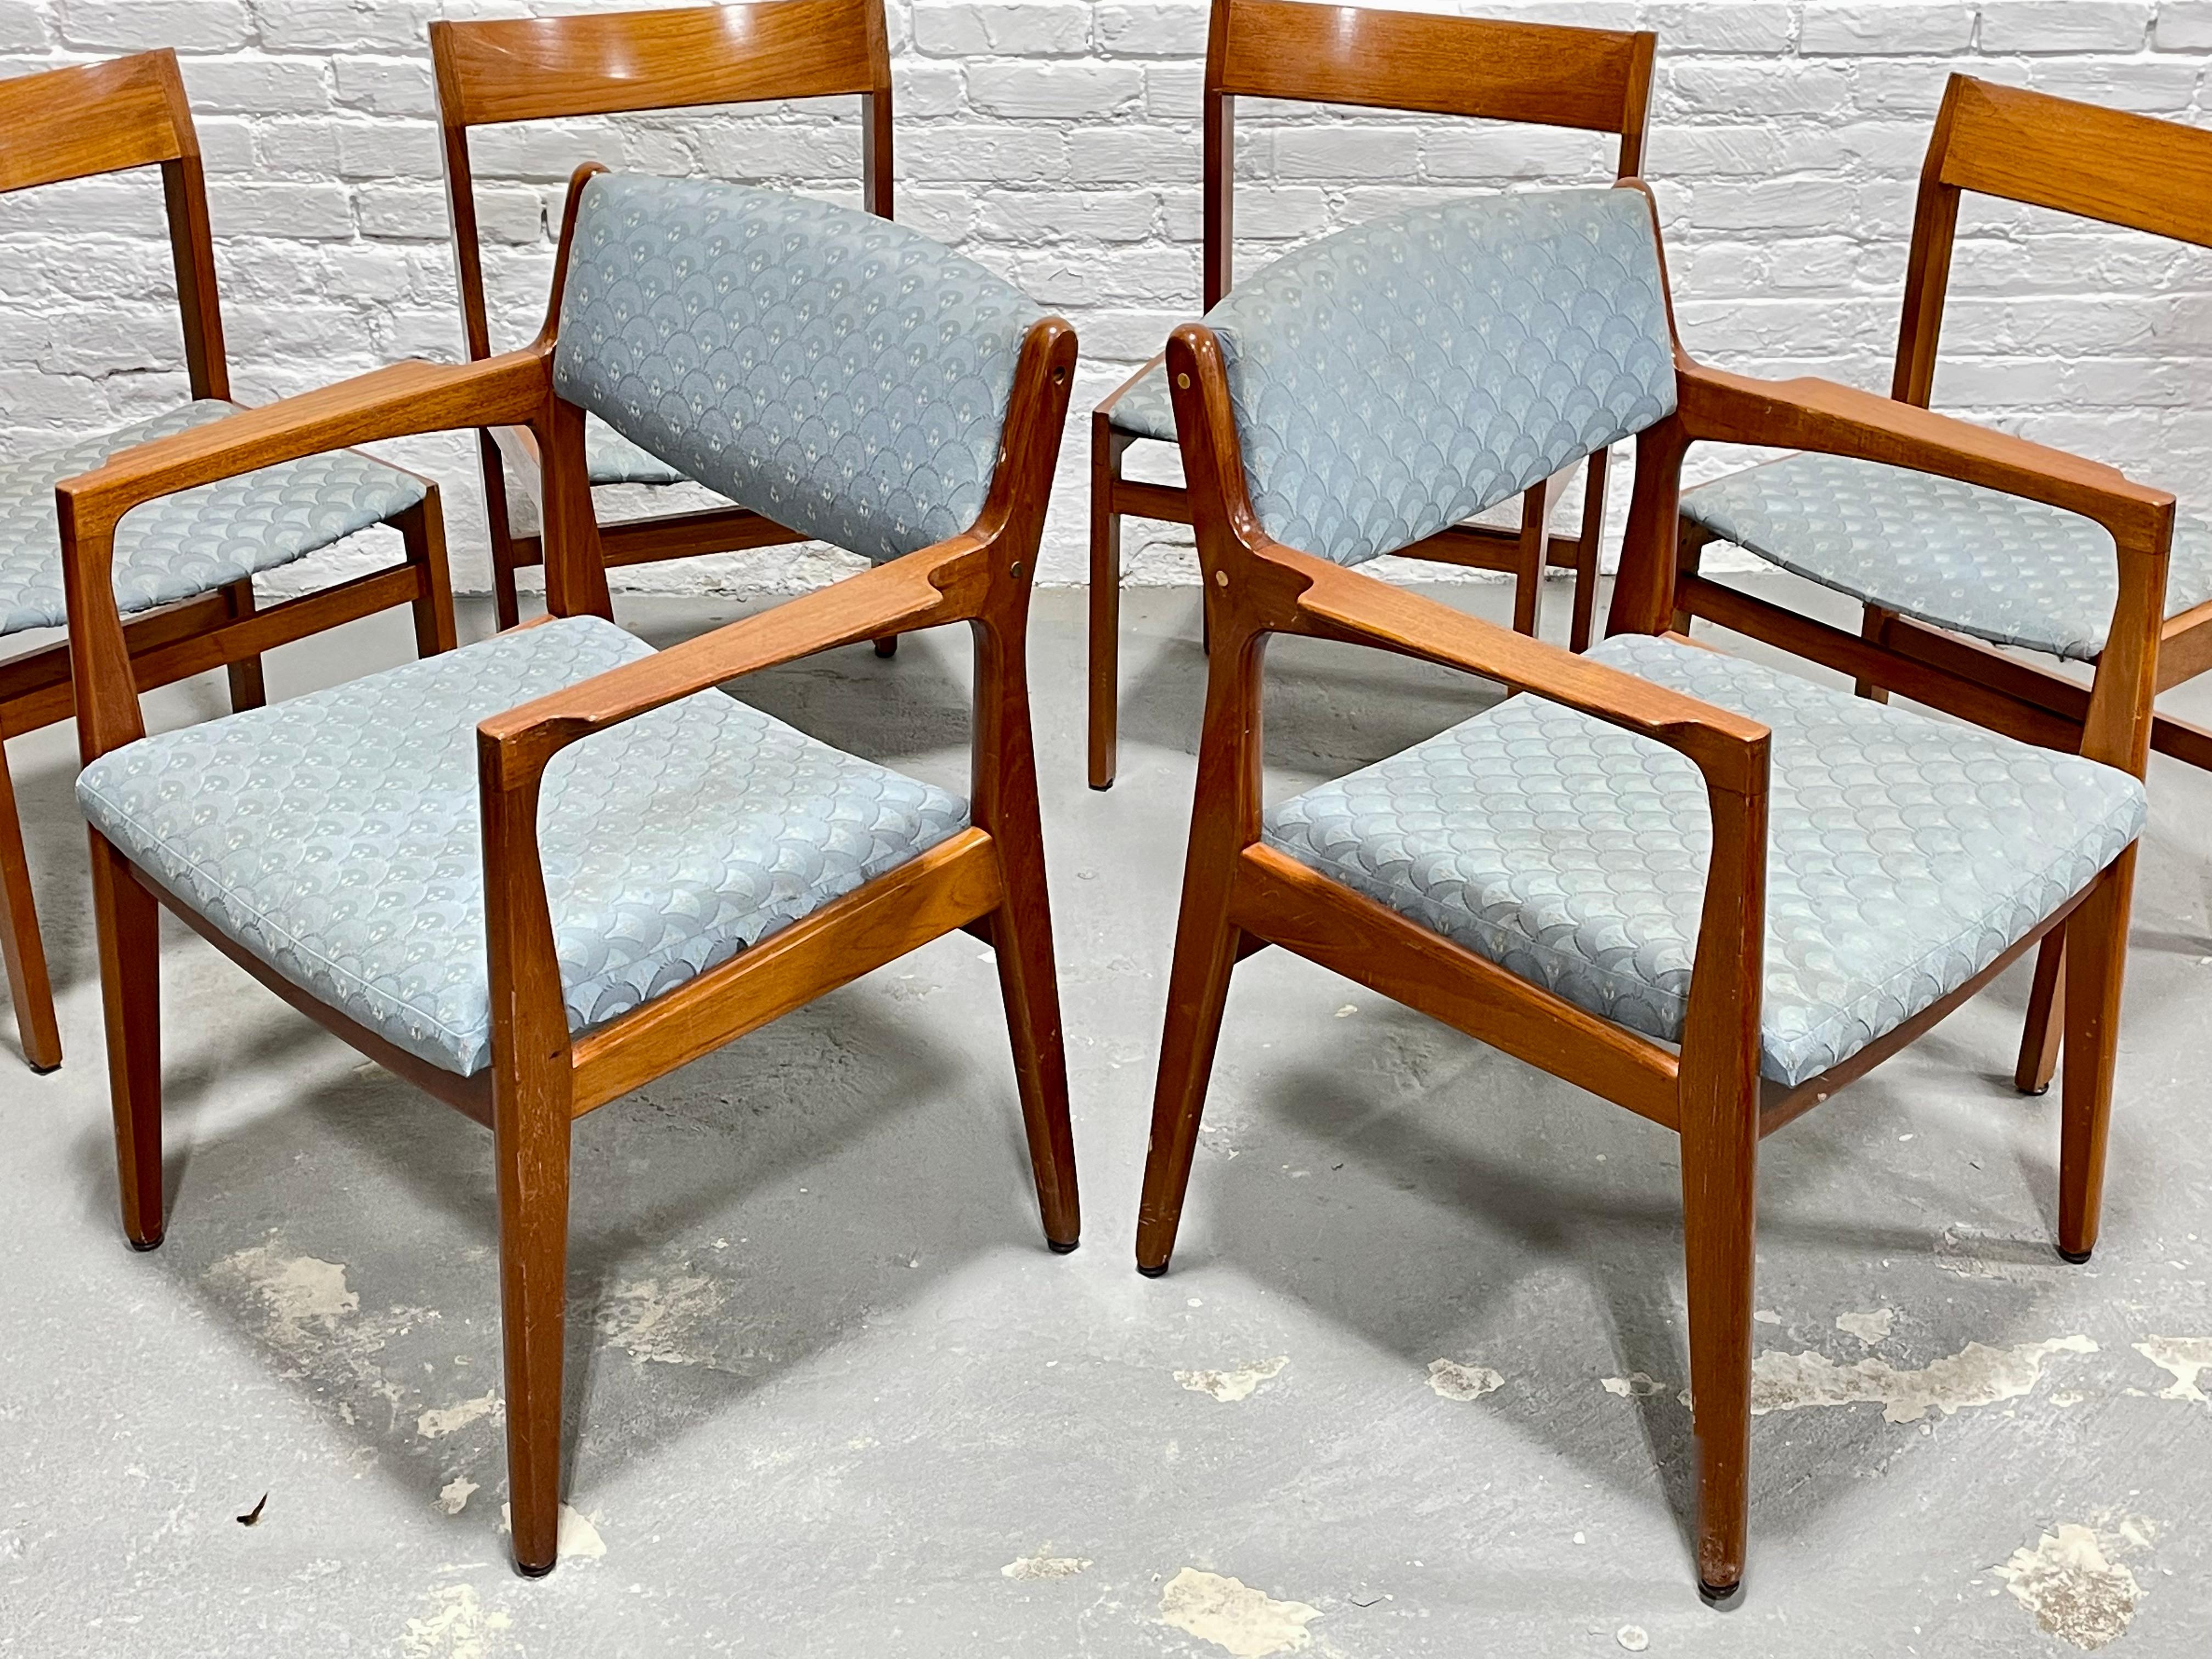 Rare set of Six Mid Century Modern DANISH Dining Chairs by Knud Andersen for C.A. Jensen, c. 1960's.  The chairs are all solid wood and the side chairs have the most awesome contoured dimensional backrests. The two armchairs have generous seats and